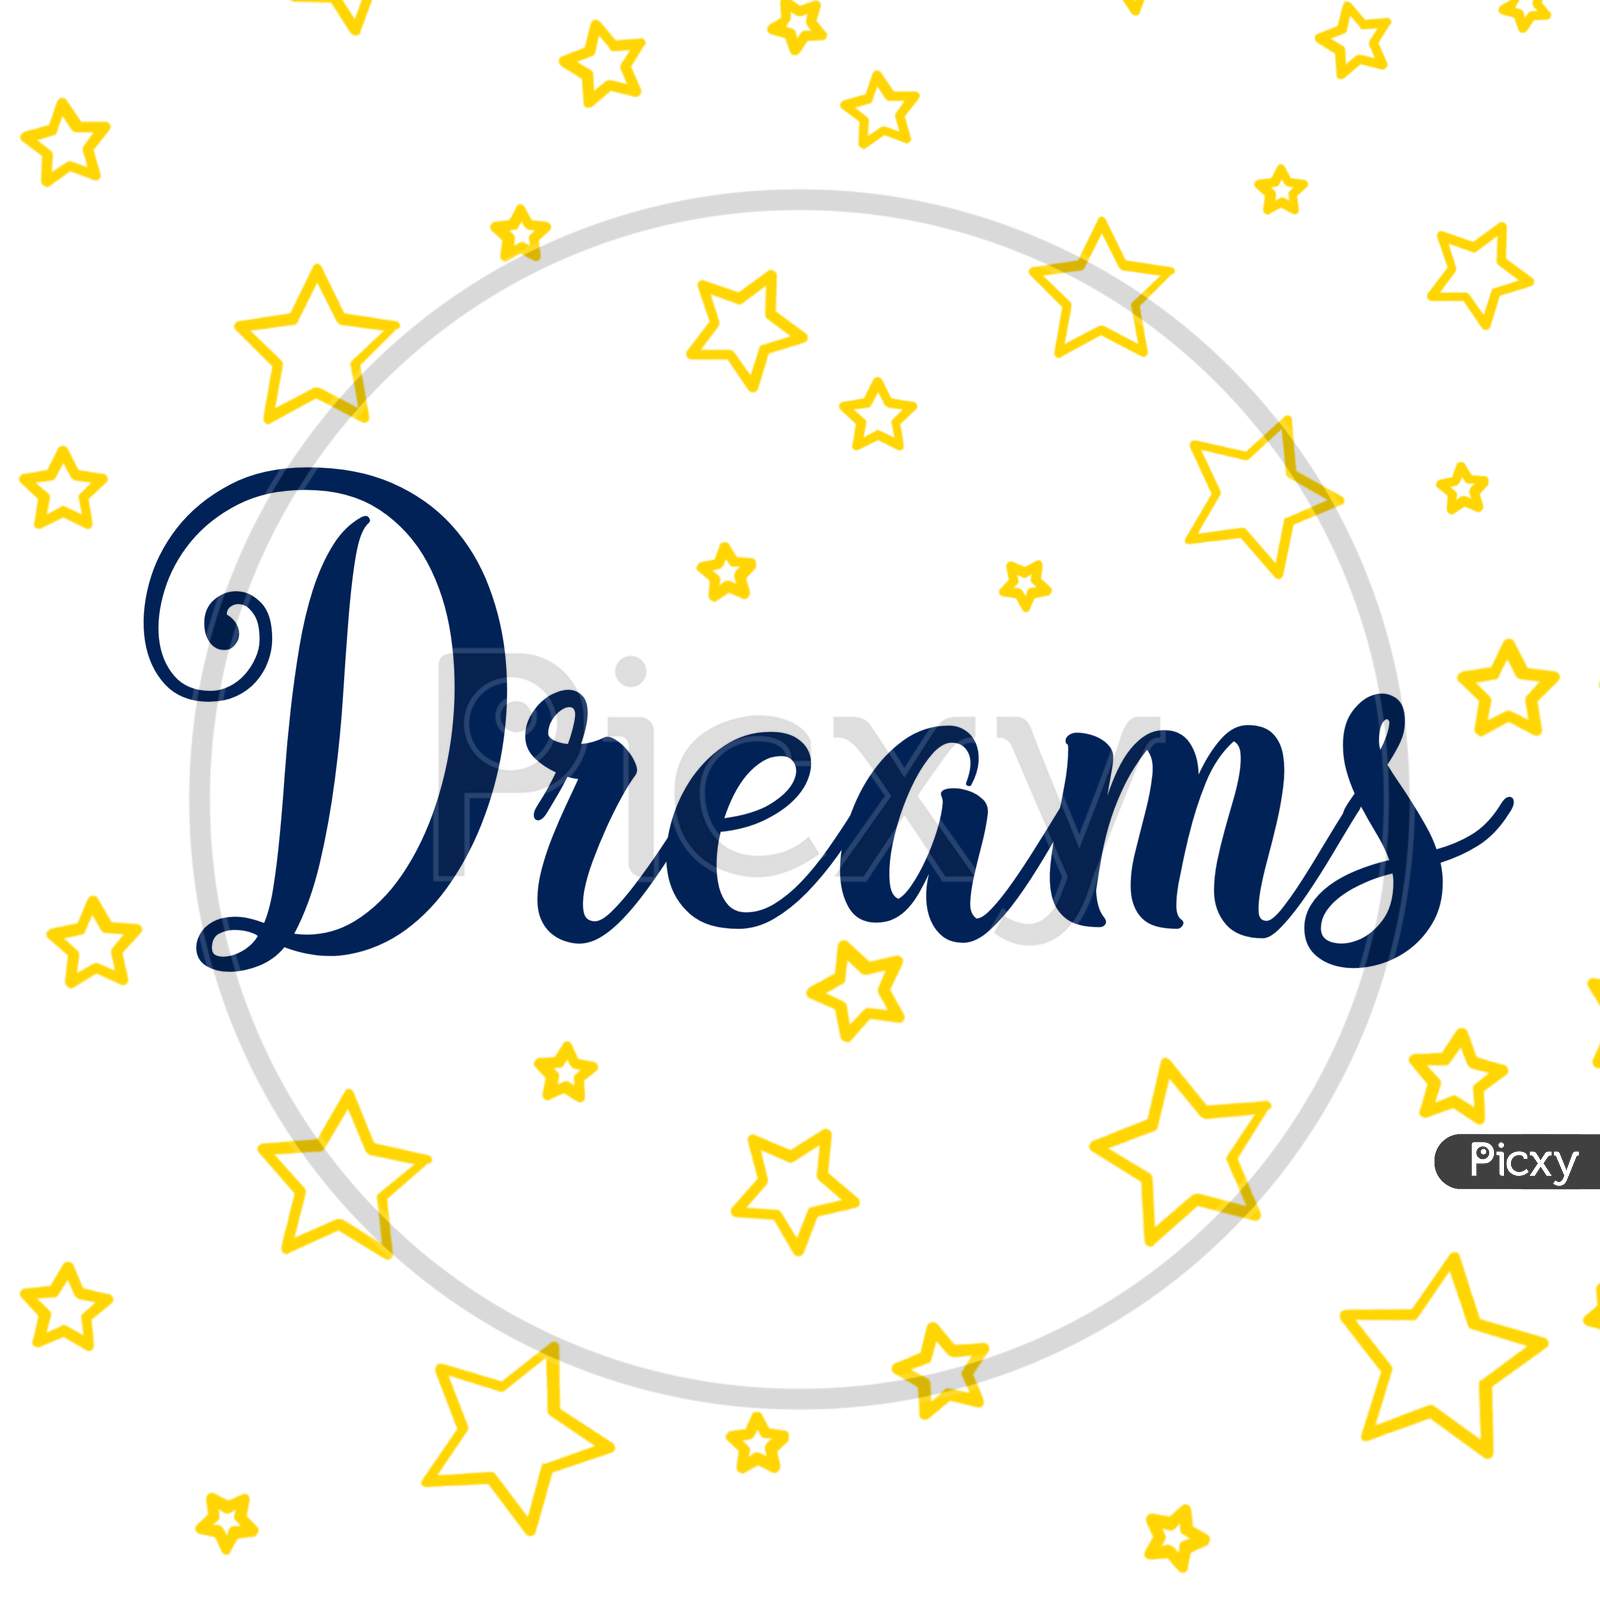 Dreams (white background with yellow stars vectors)